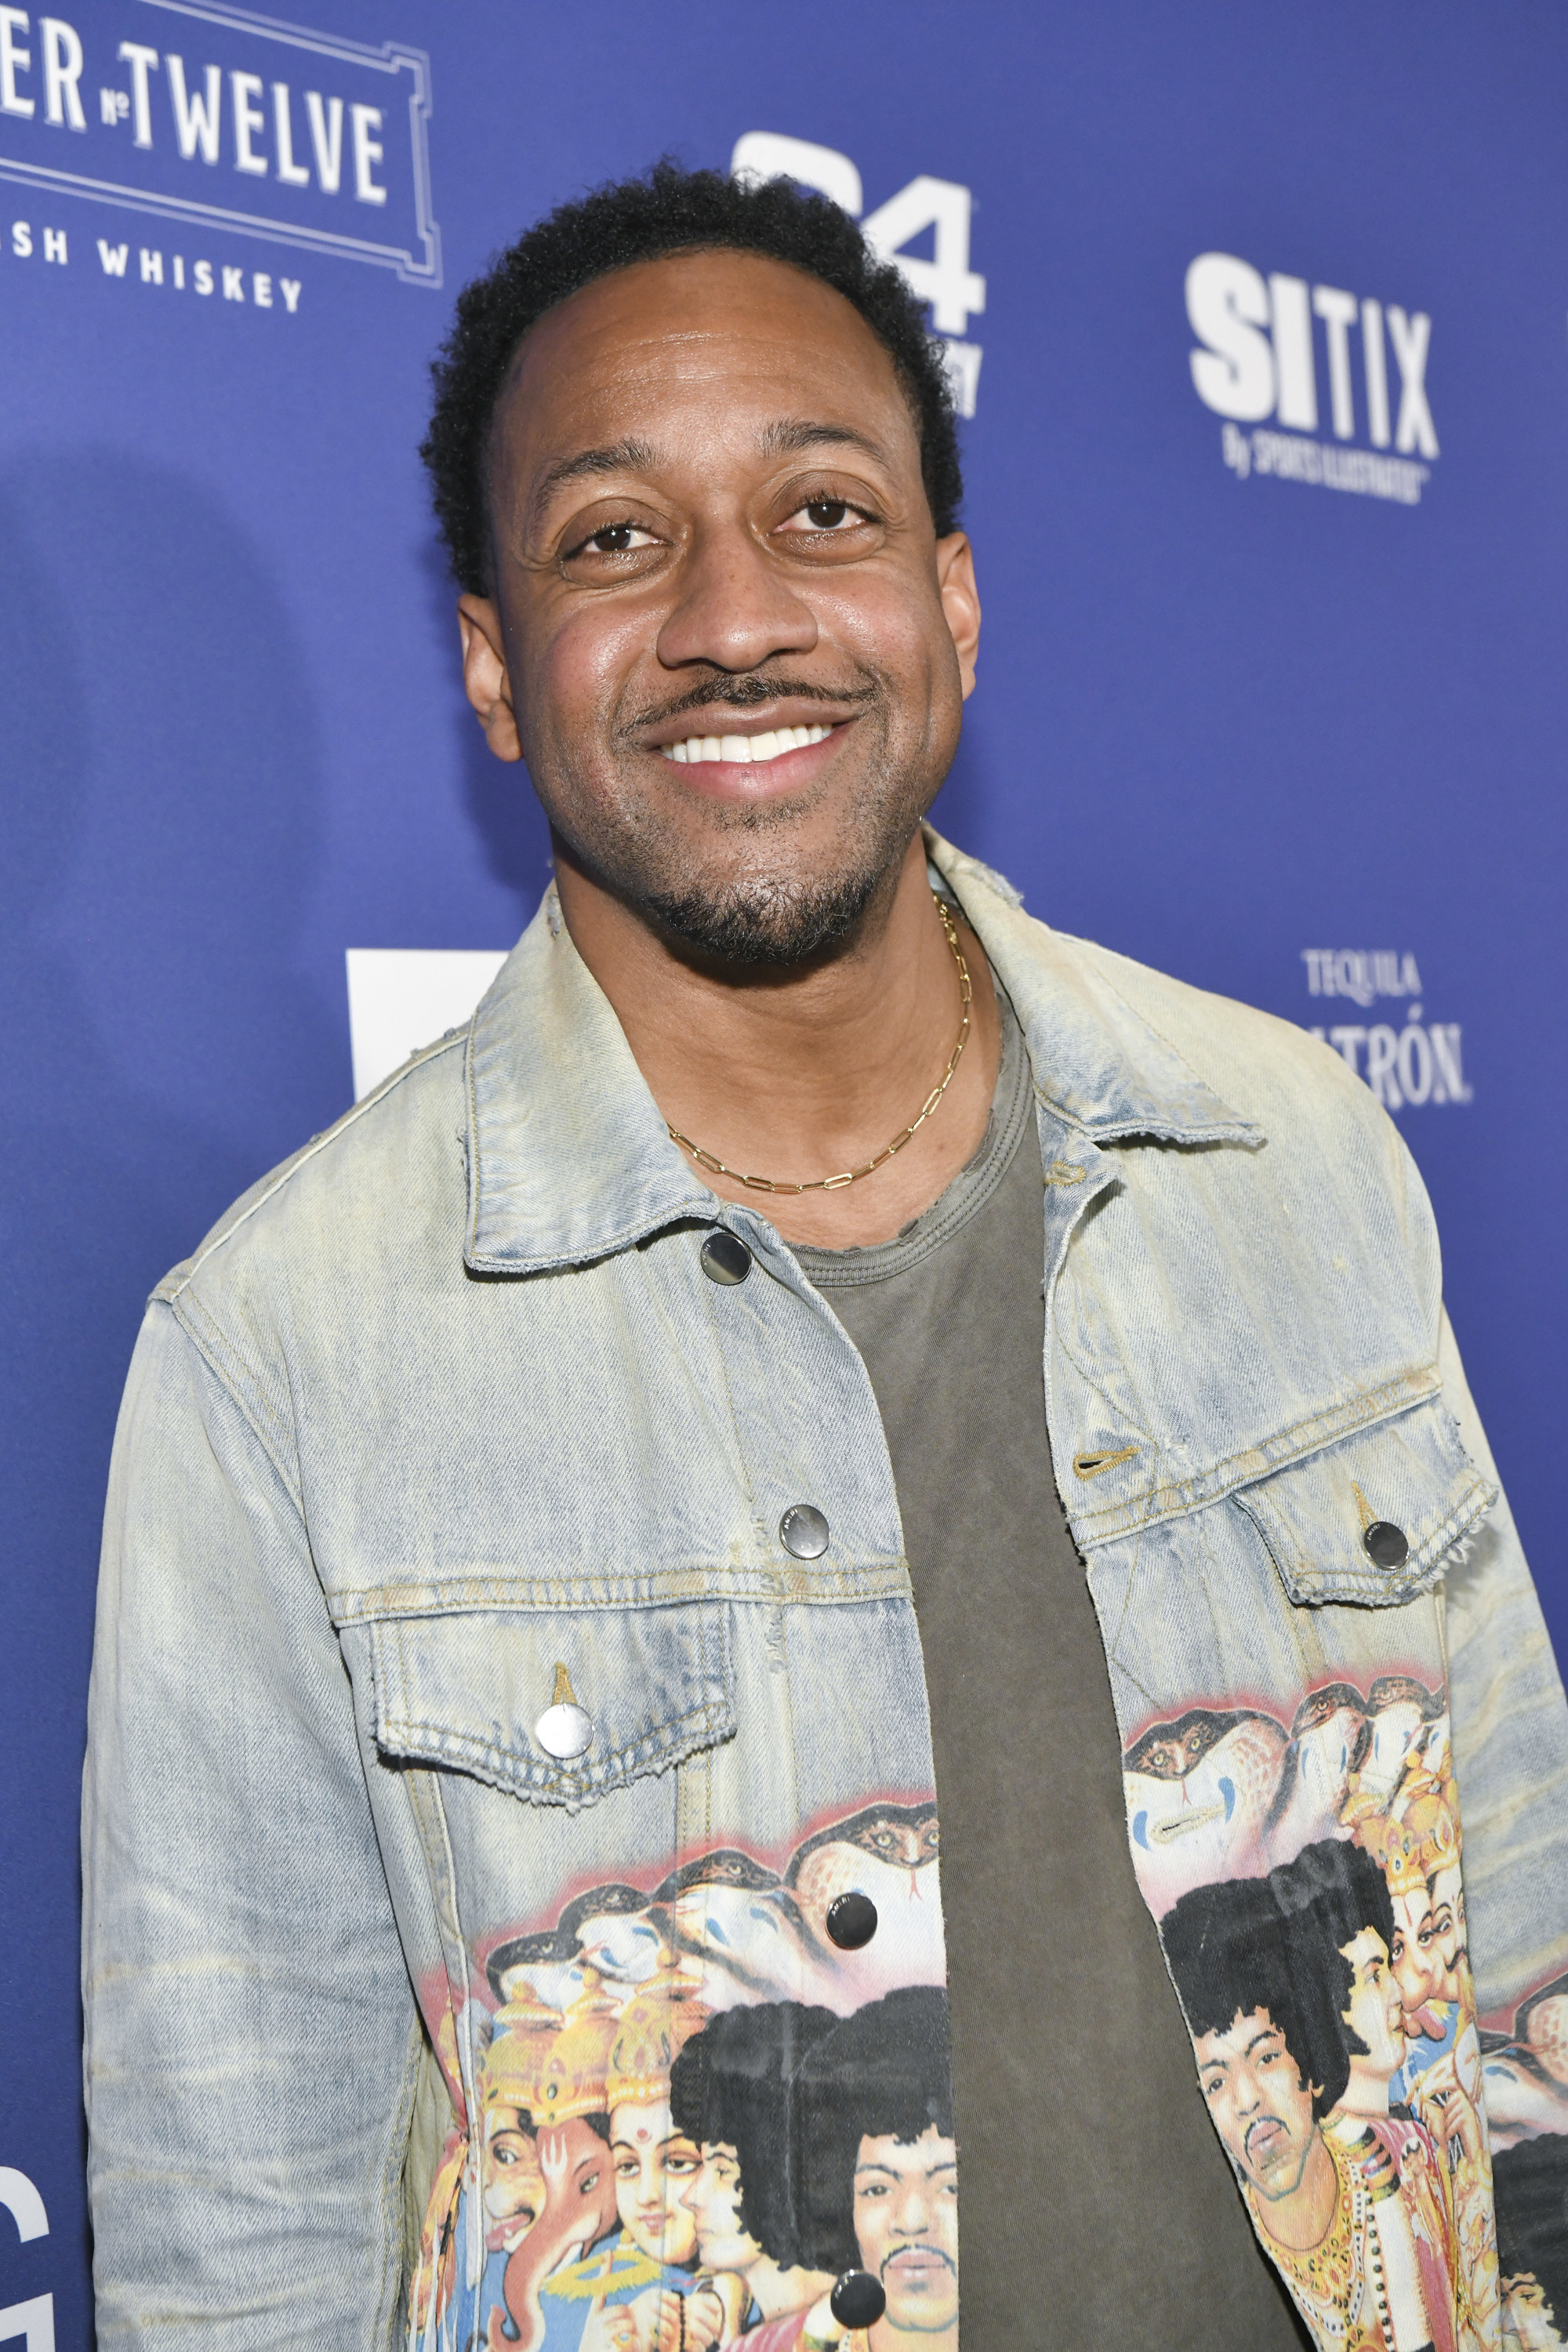 Jaleel White smiles as he&#x27;s photographed at the Sports Illustrated Super Bowl Party in February 2022